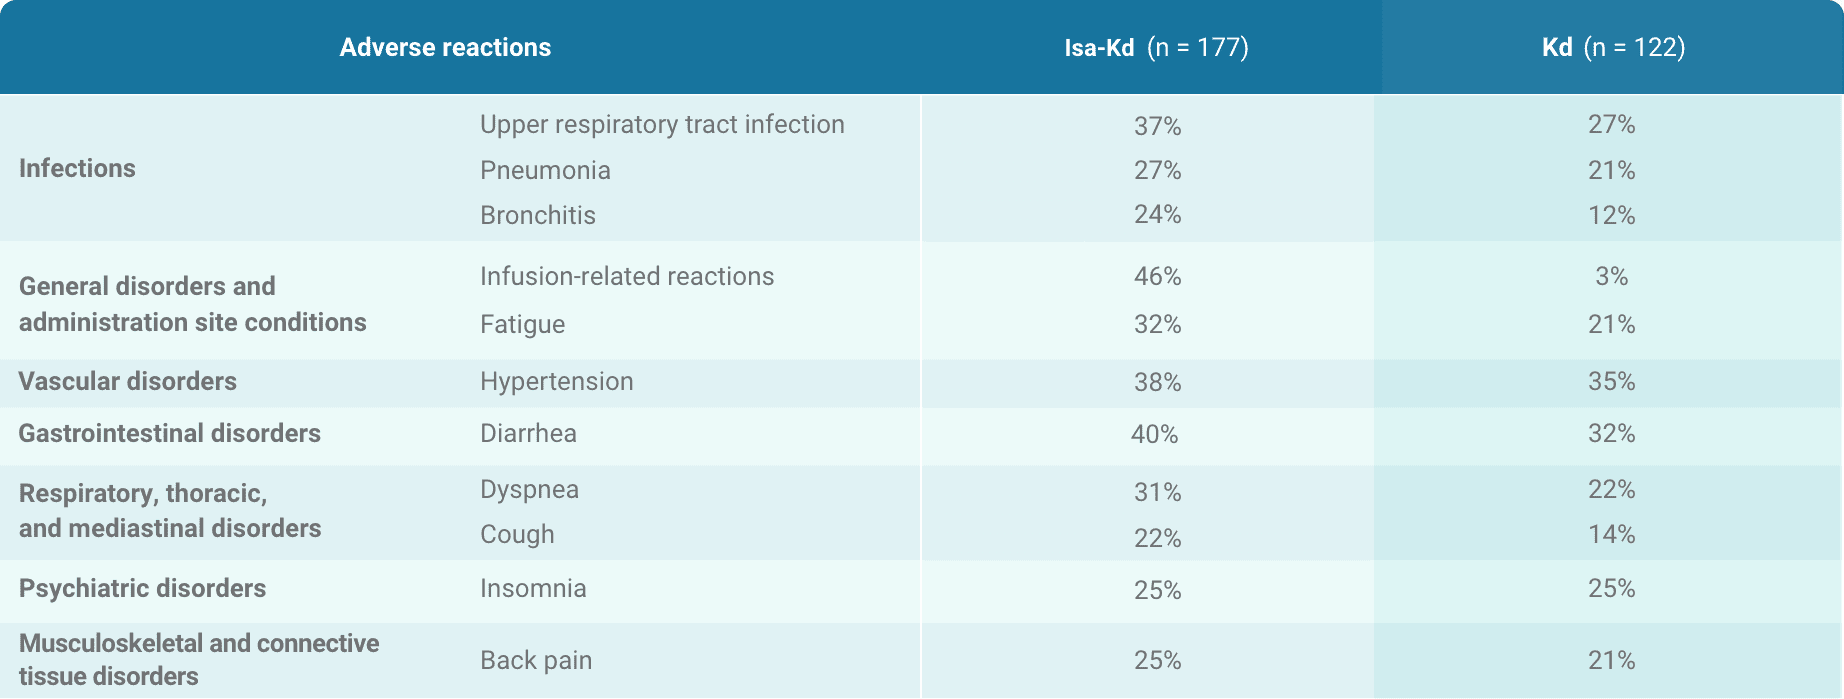 Most common adverse reactions in Isa-Kd vs Kd arms